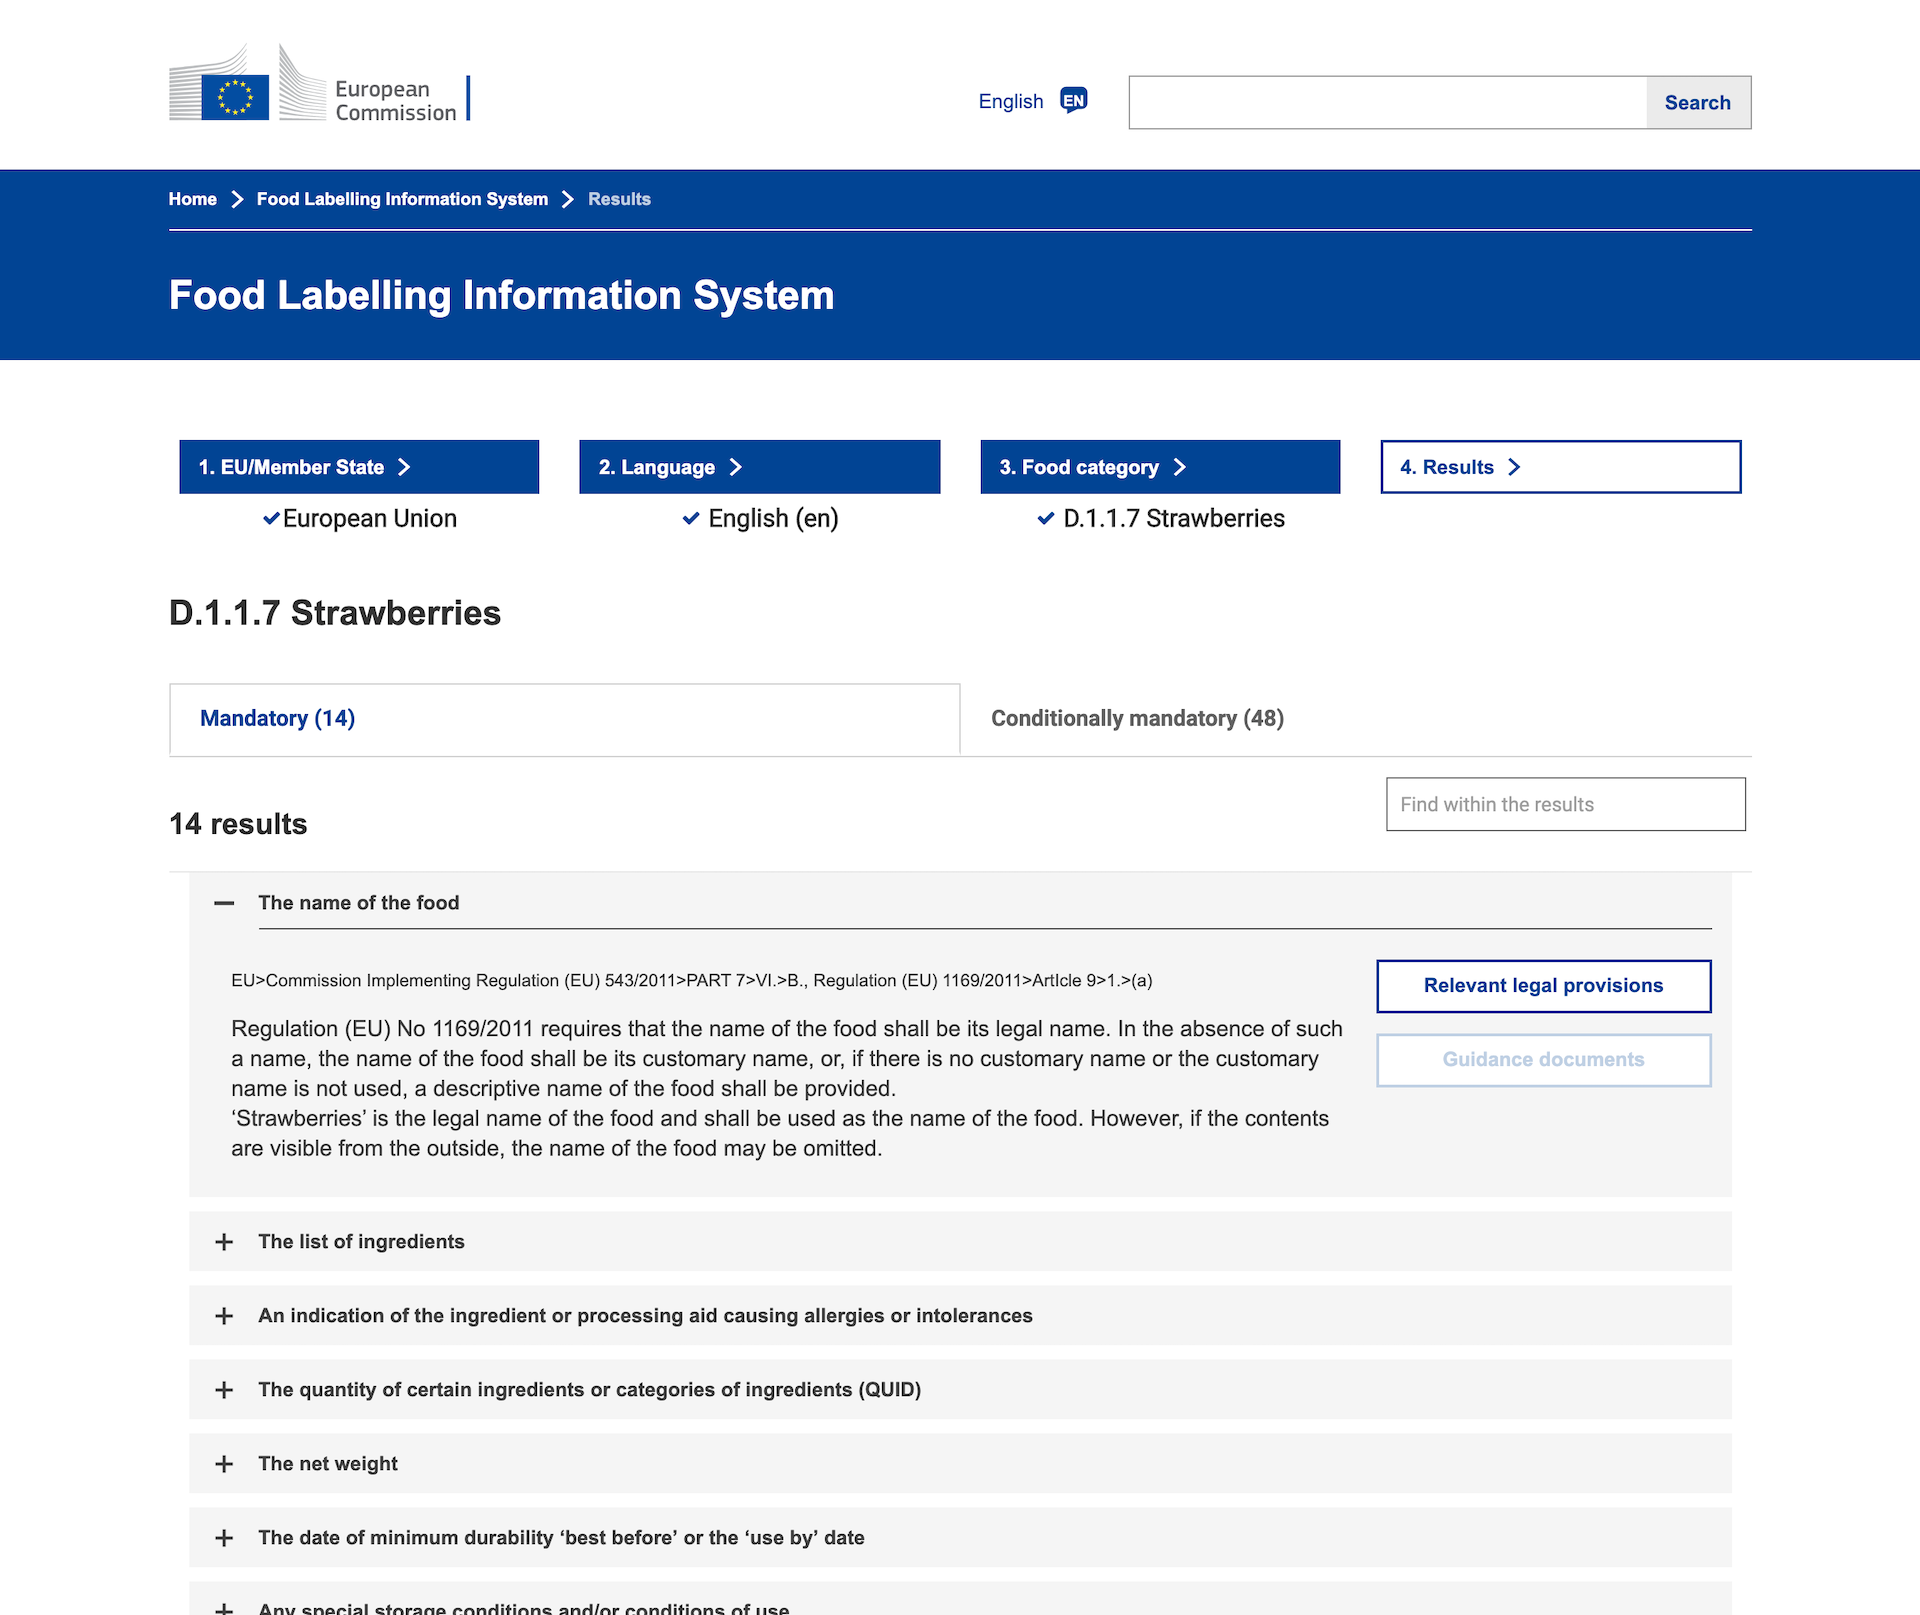 Food Labelling Information System application developed by the European Commission using Symfony